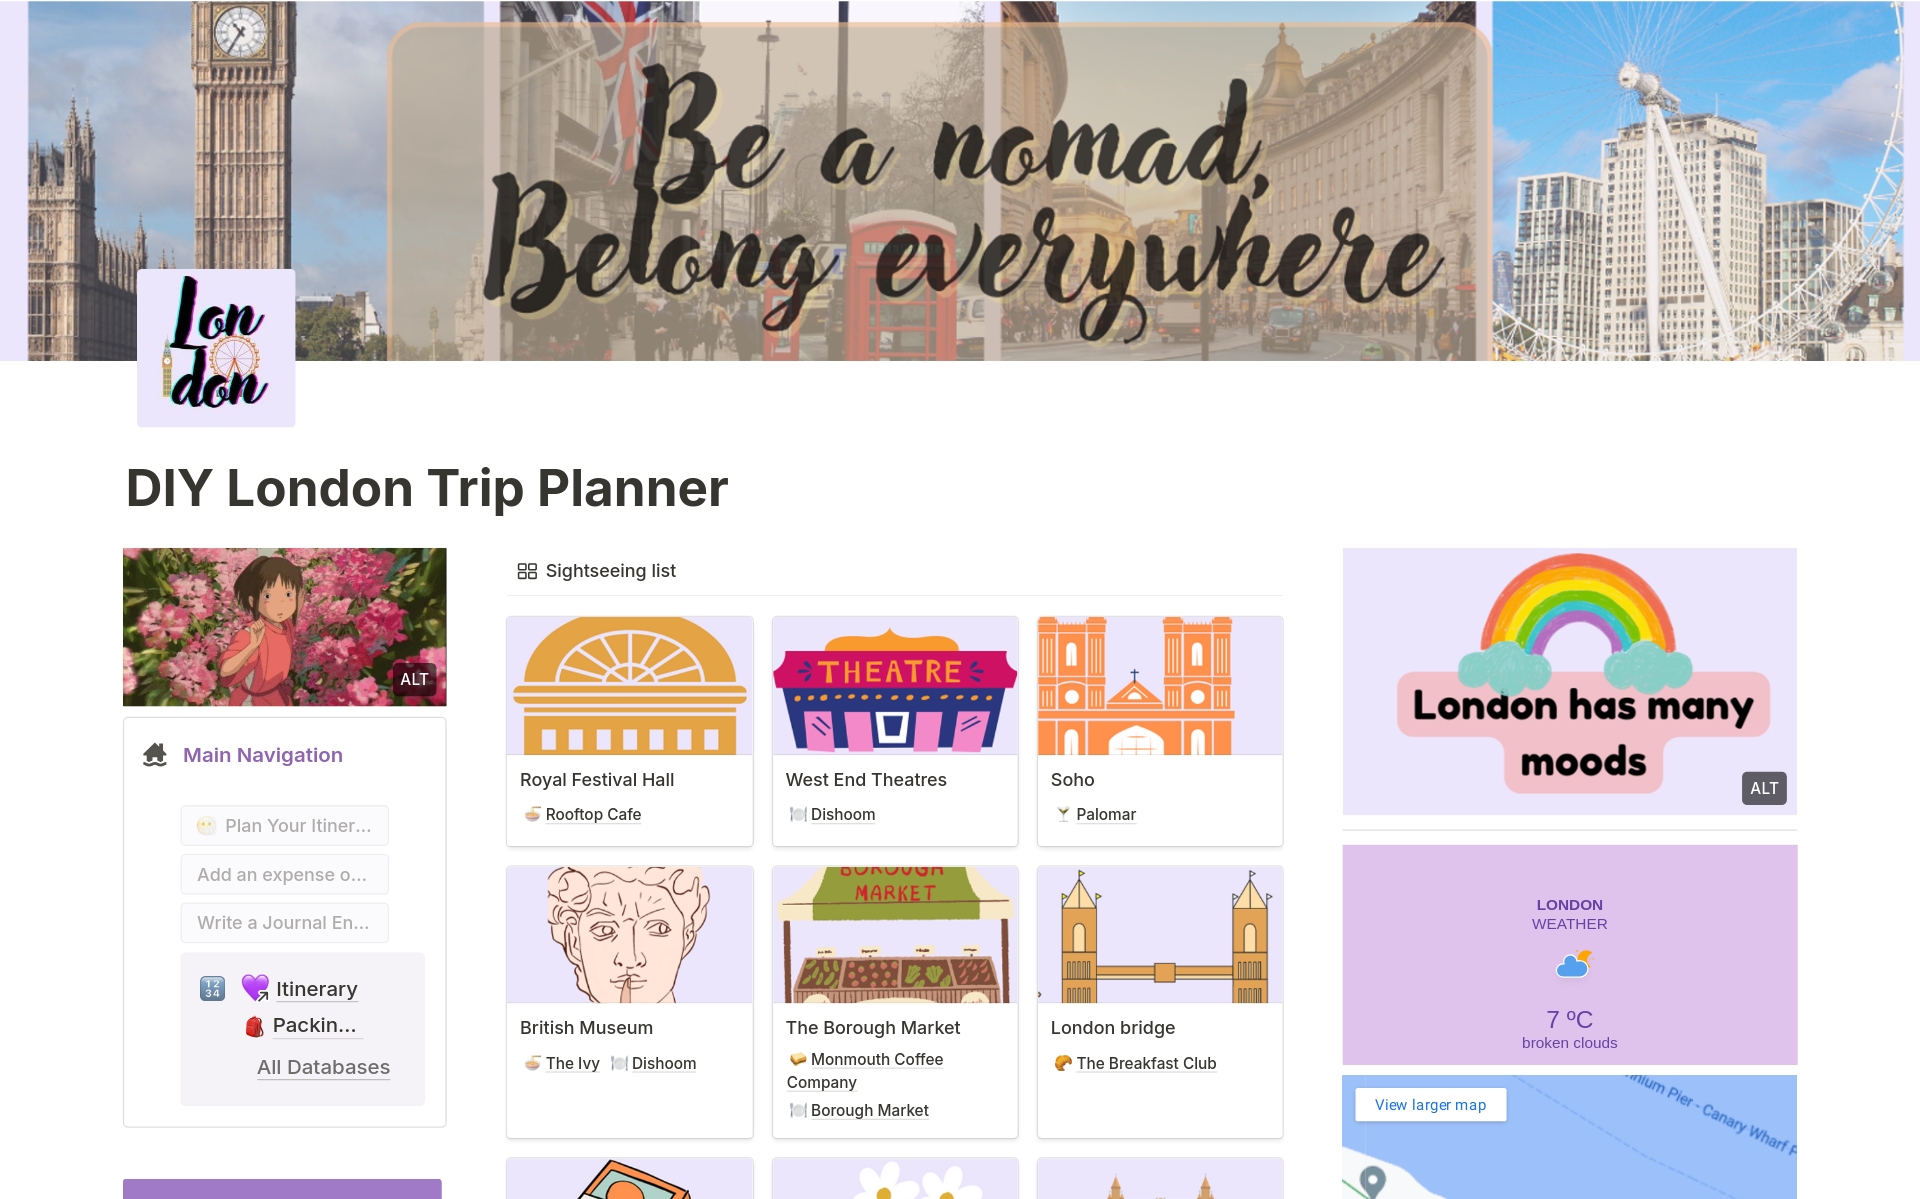 The DIY London Trip Planner lets you plan your next London trip in less than 5 minutes.